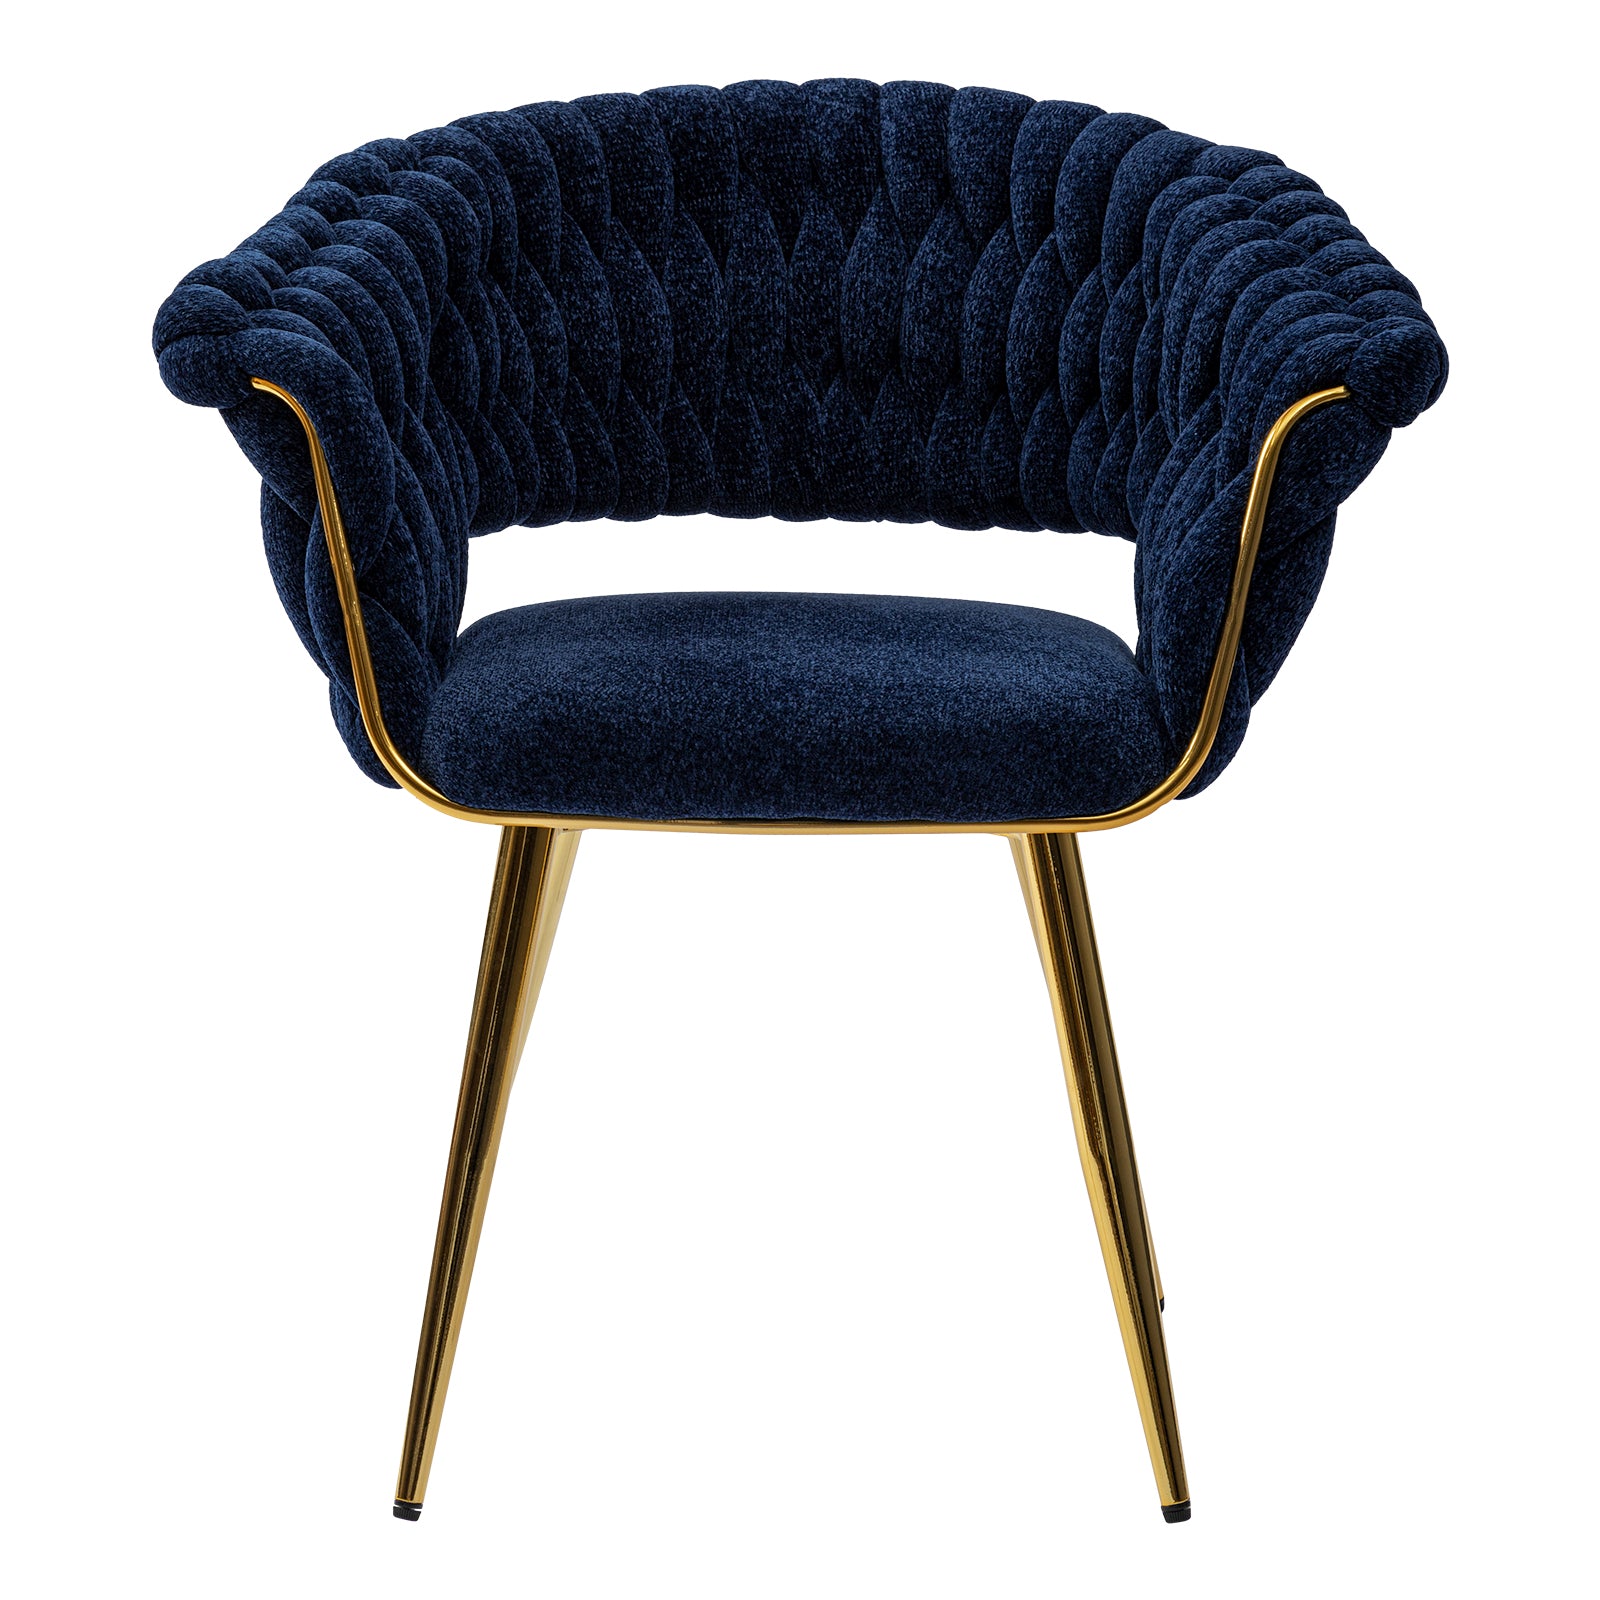 Chenille Upholstered Accent Chairs